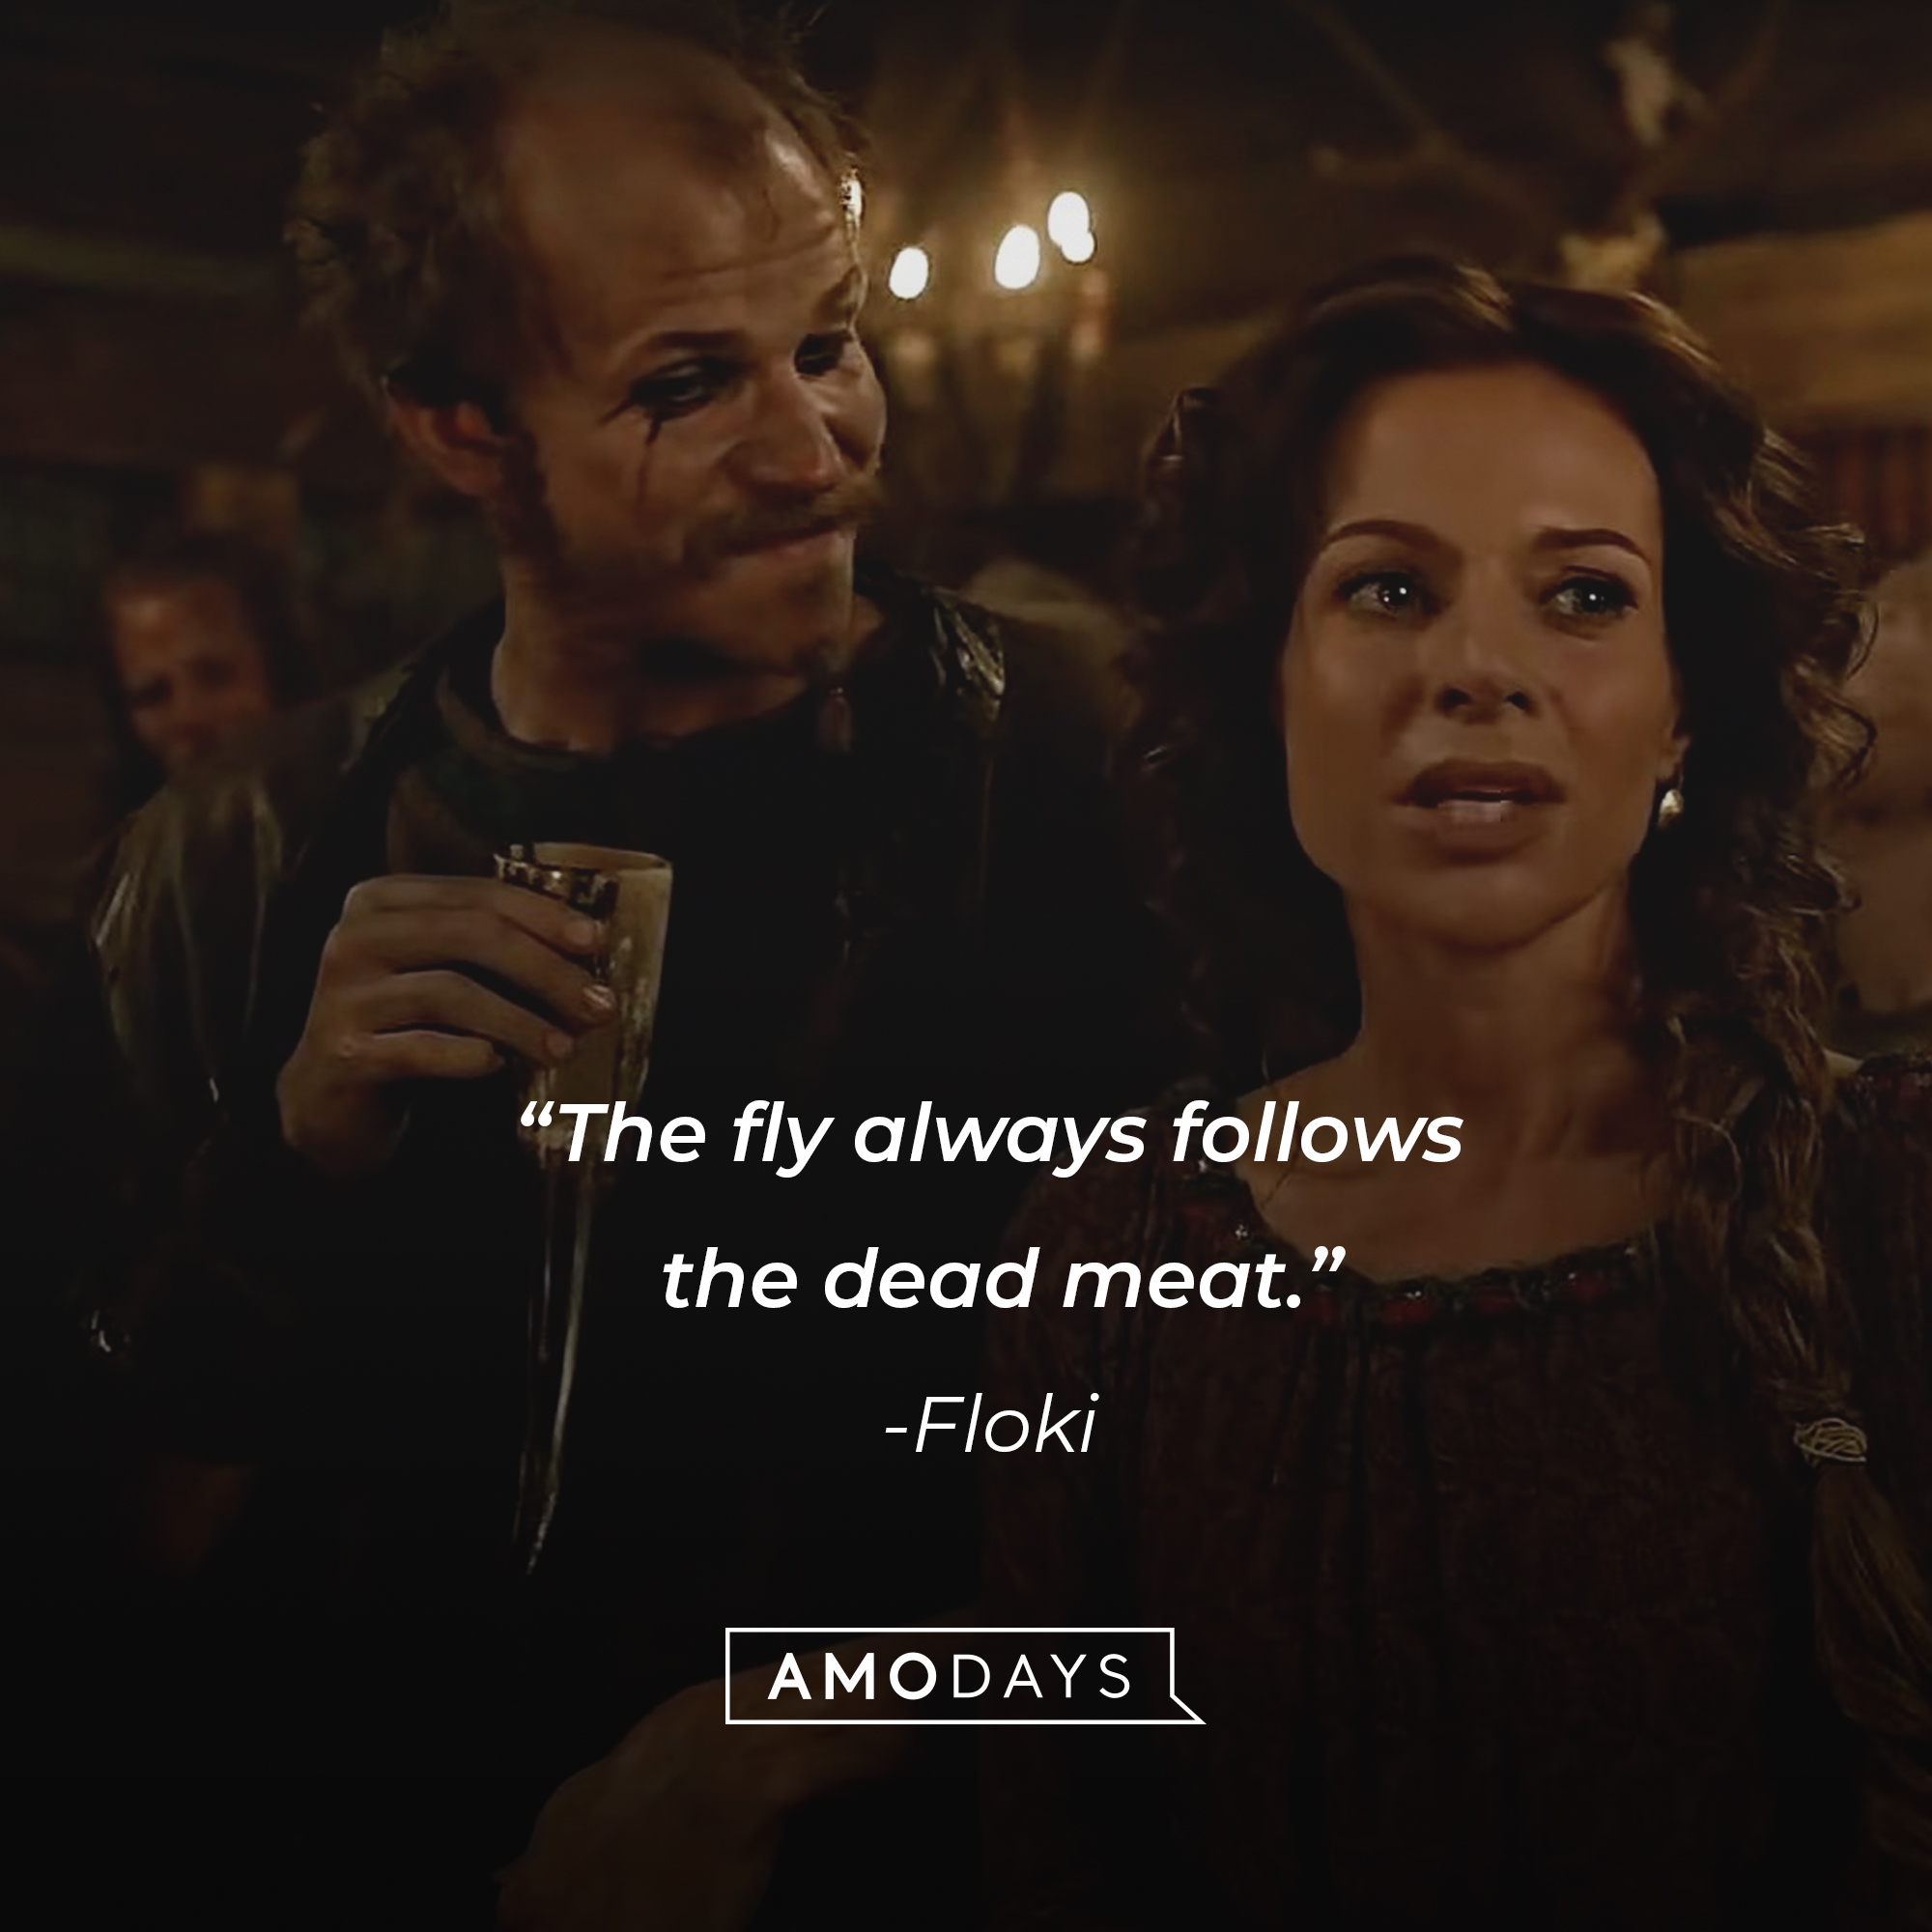 An image of Siggy Haraldson and Floki with his quote: “The fly always follows the dead meat.” | Source:  facebook.com/Vikings